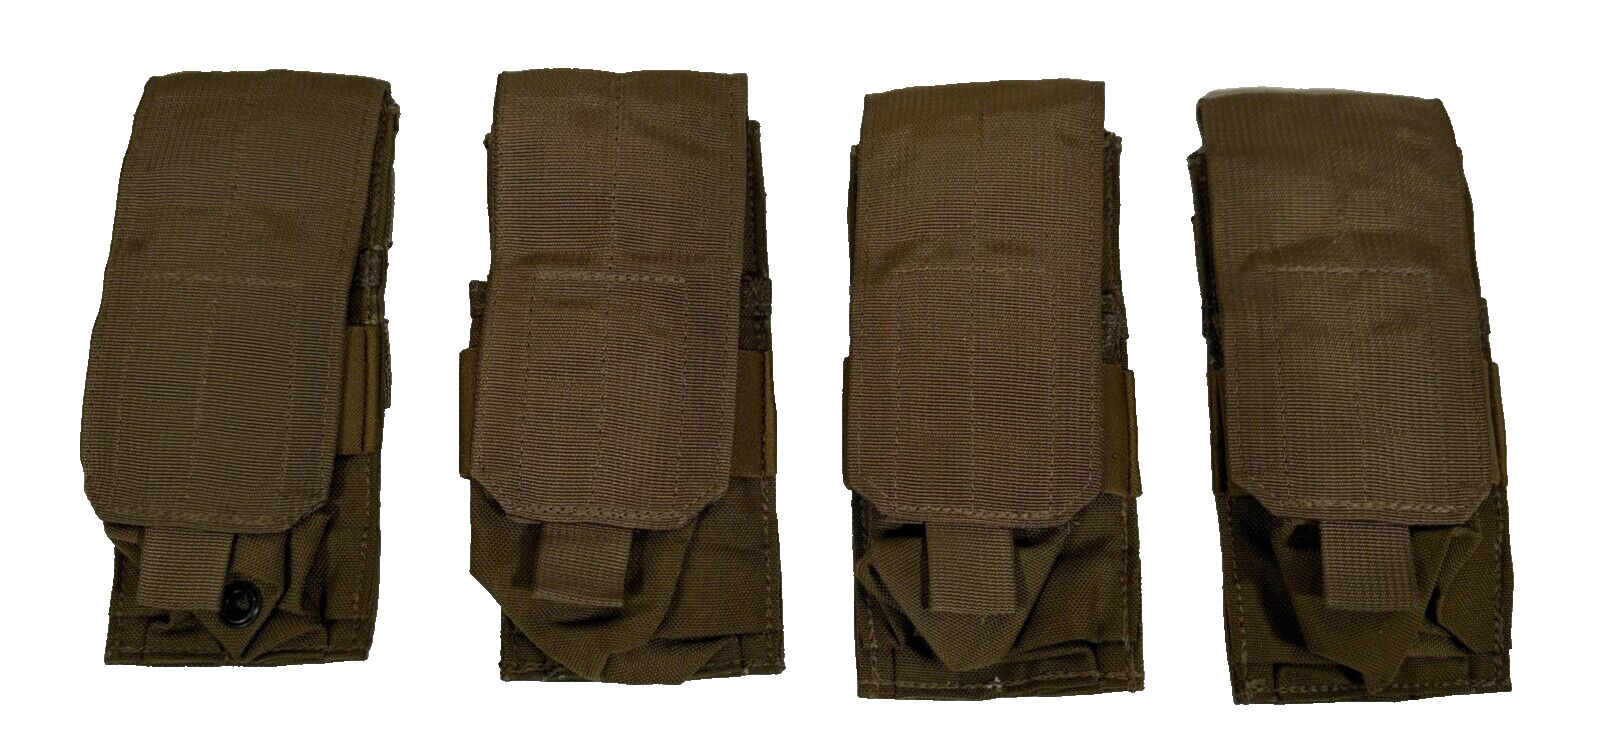 New  4 ea. USMC Military Eagle Industries Single Double Mag Pouch Coyote Brown